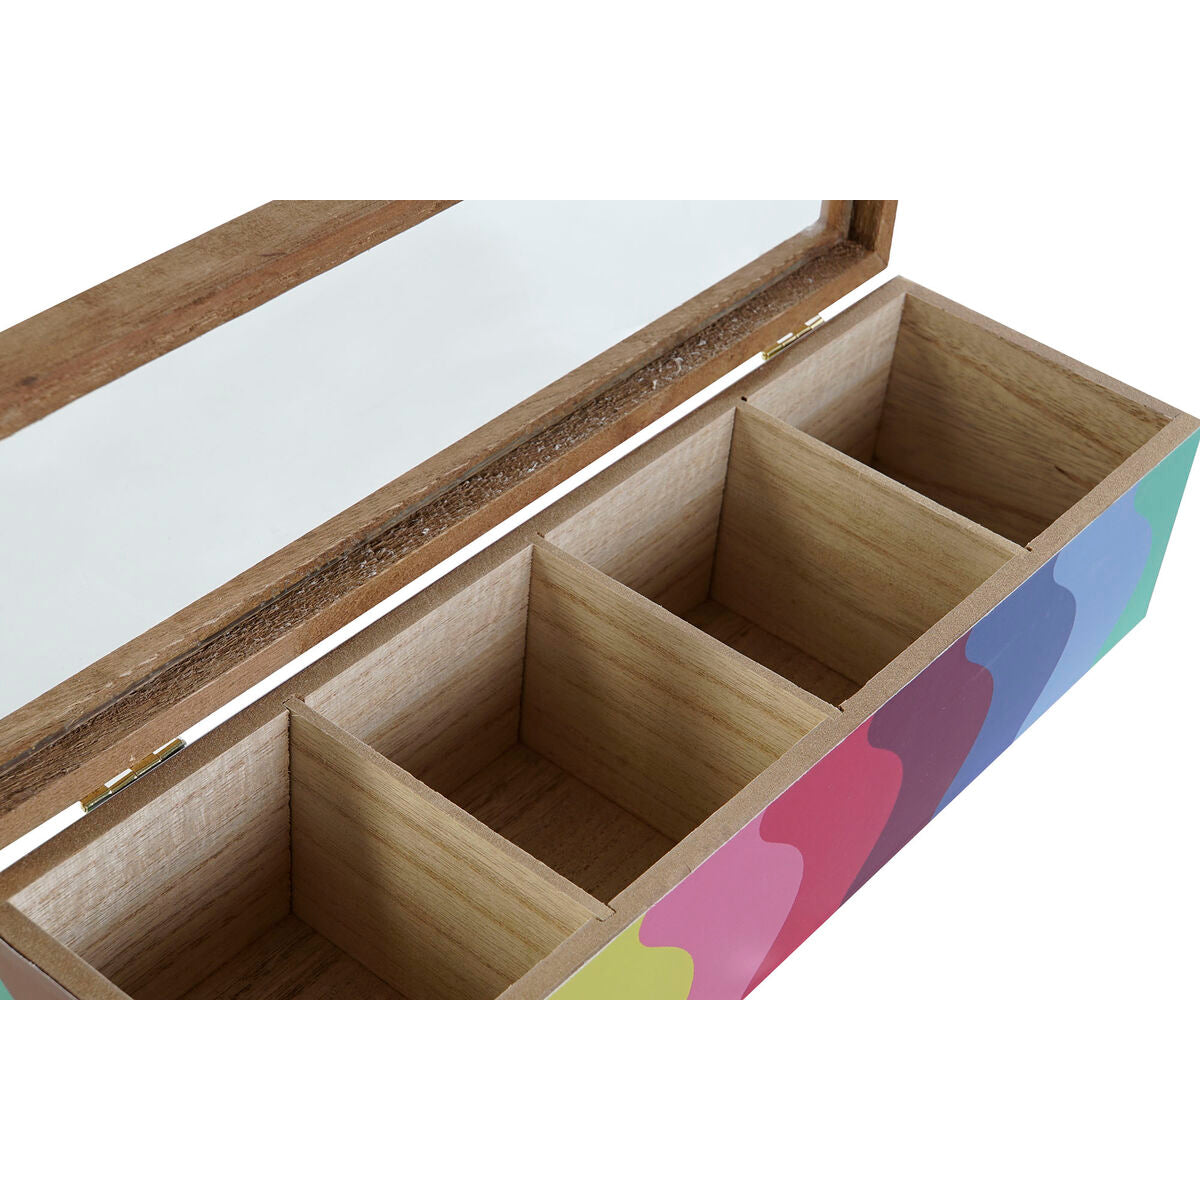 Box for Infusions DKD Home Decor Wit Multicolour Hout MDF (4 Stuks)